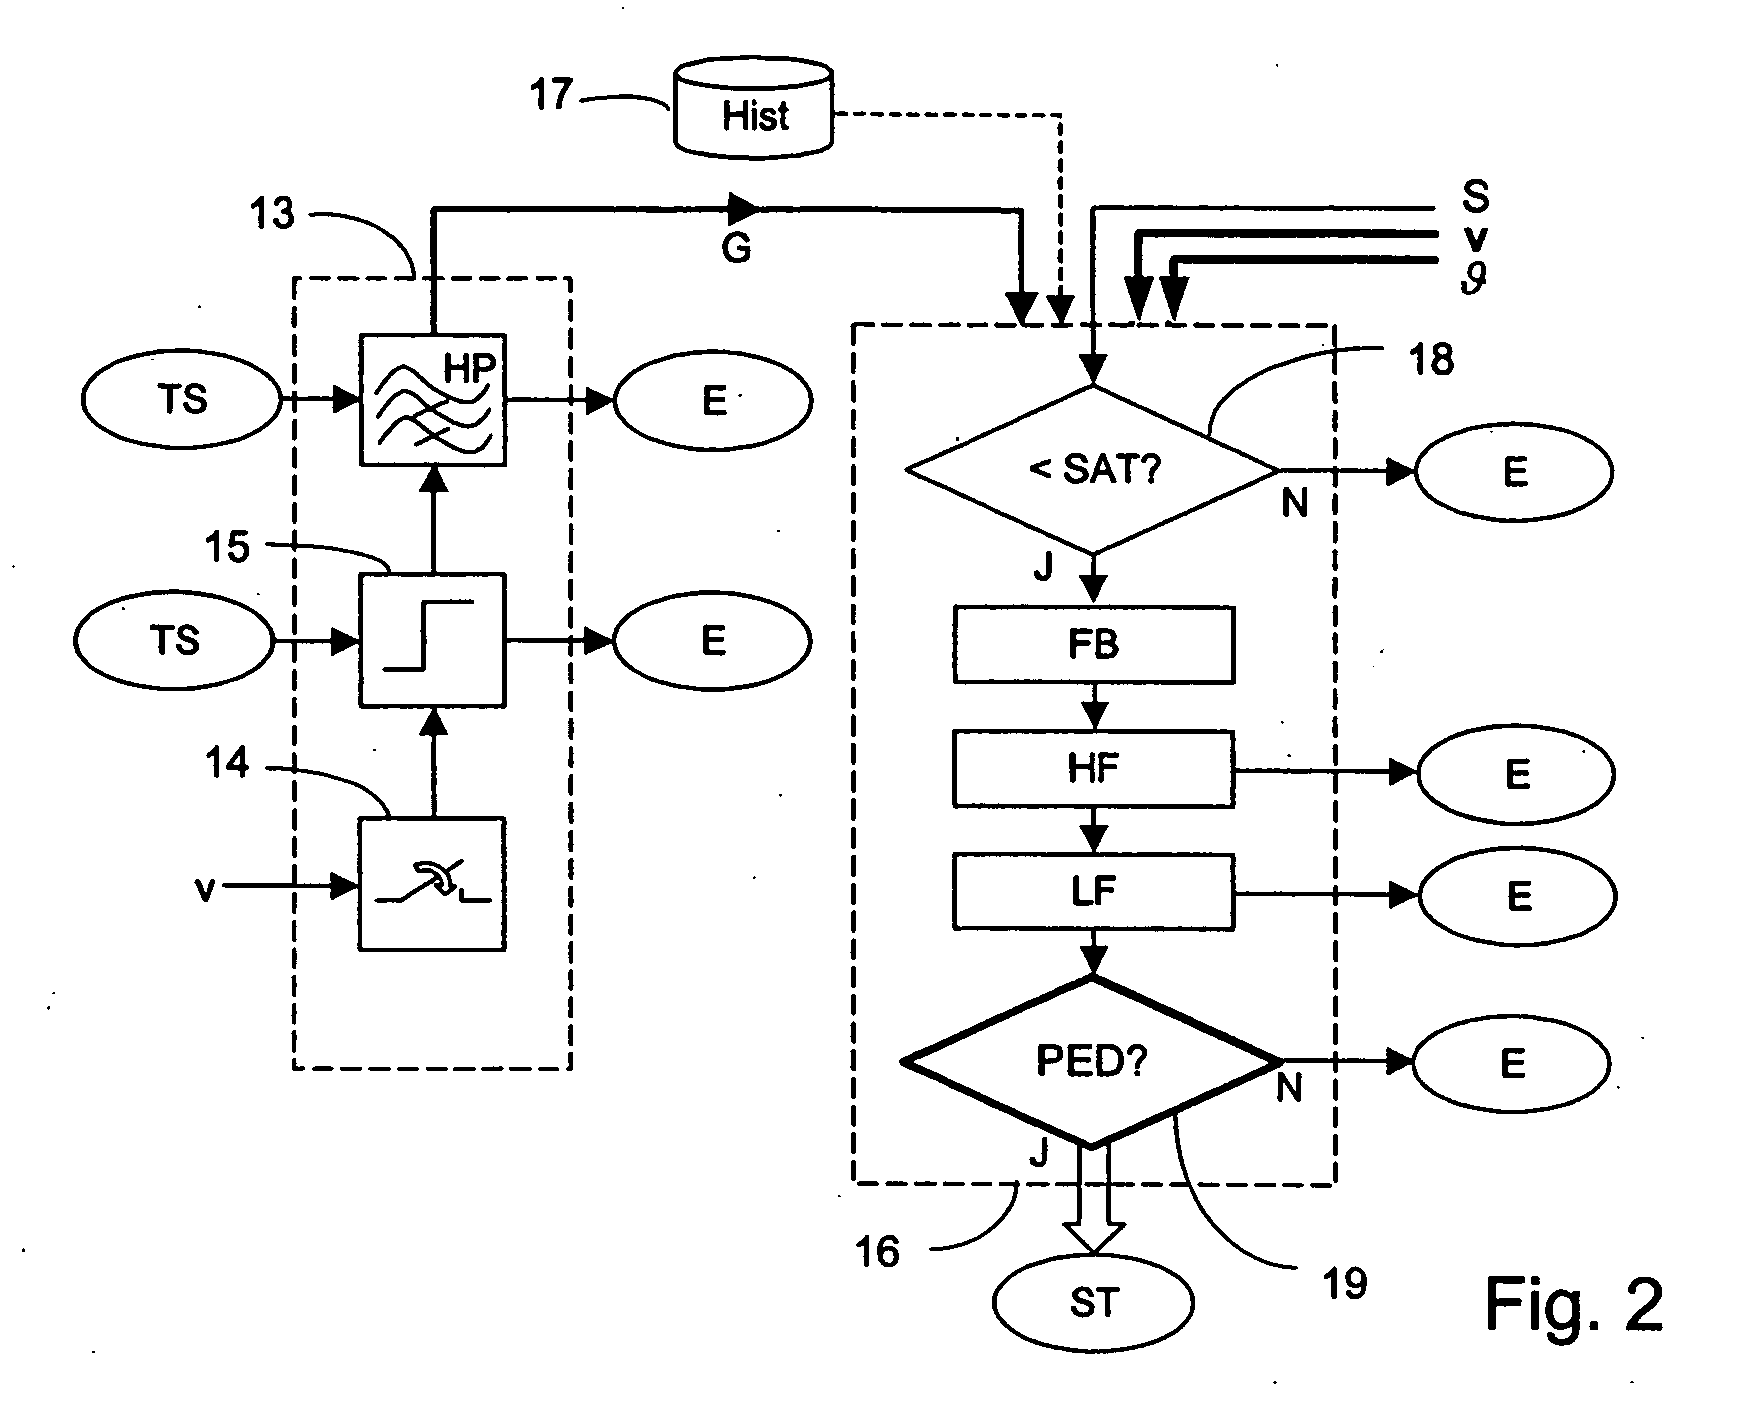 Method for controlling a safety system in a vehicle